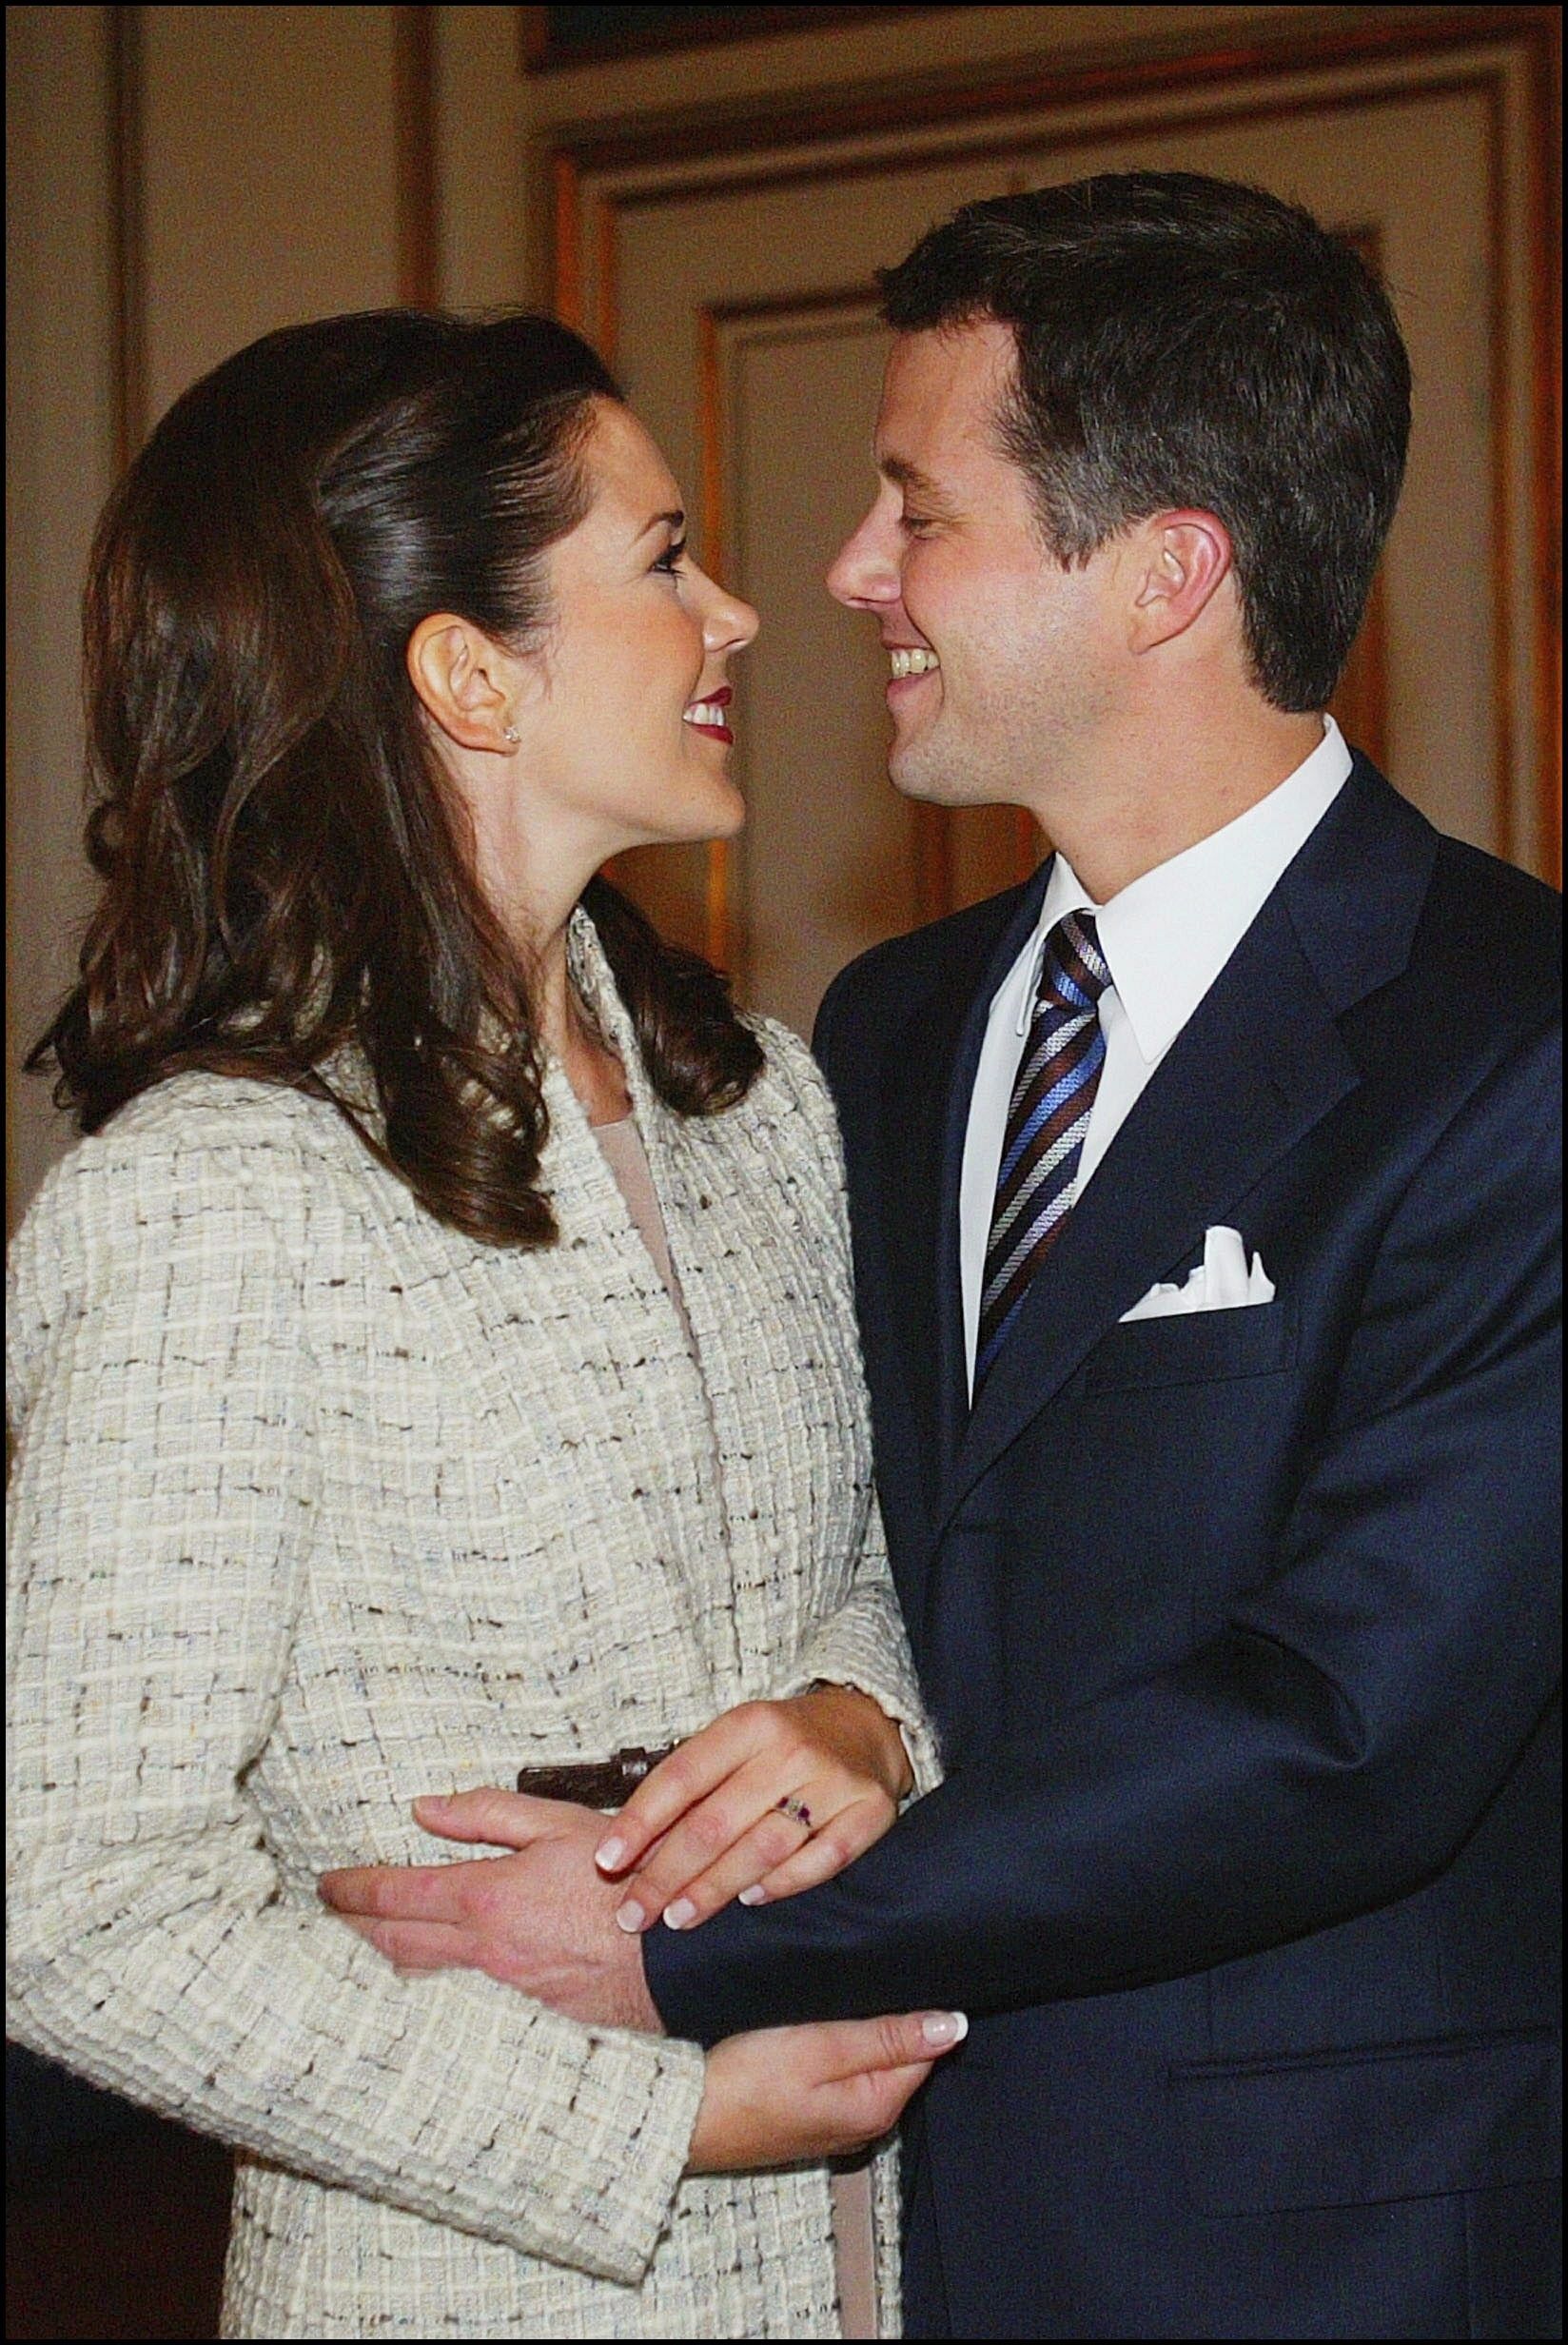 denmark   october 08  mary elizabeth donaldson and crown prince frederik in fredensborg, denmark on october 08, 2003  photo by eric traversgamma rapho via getty images